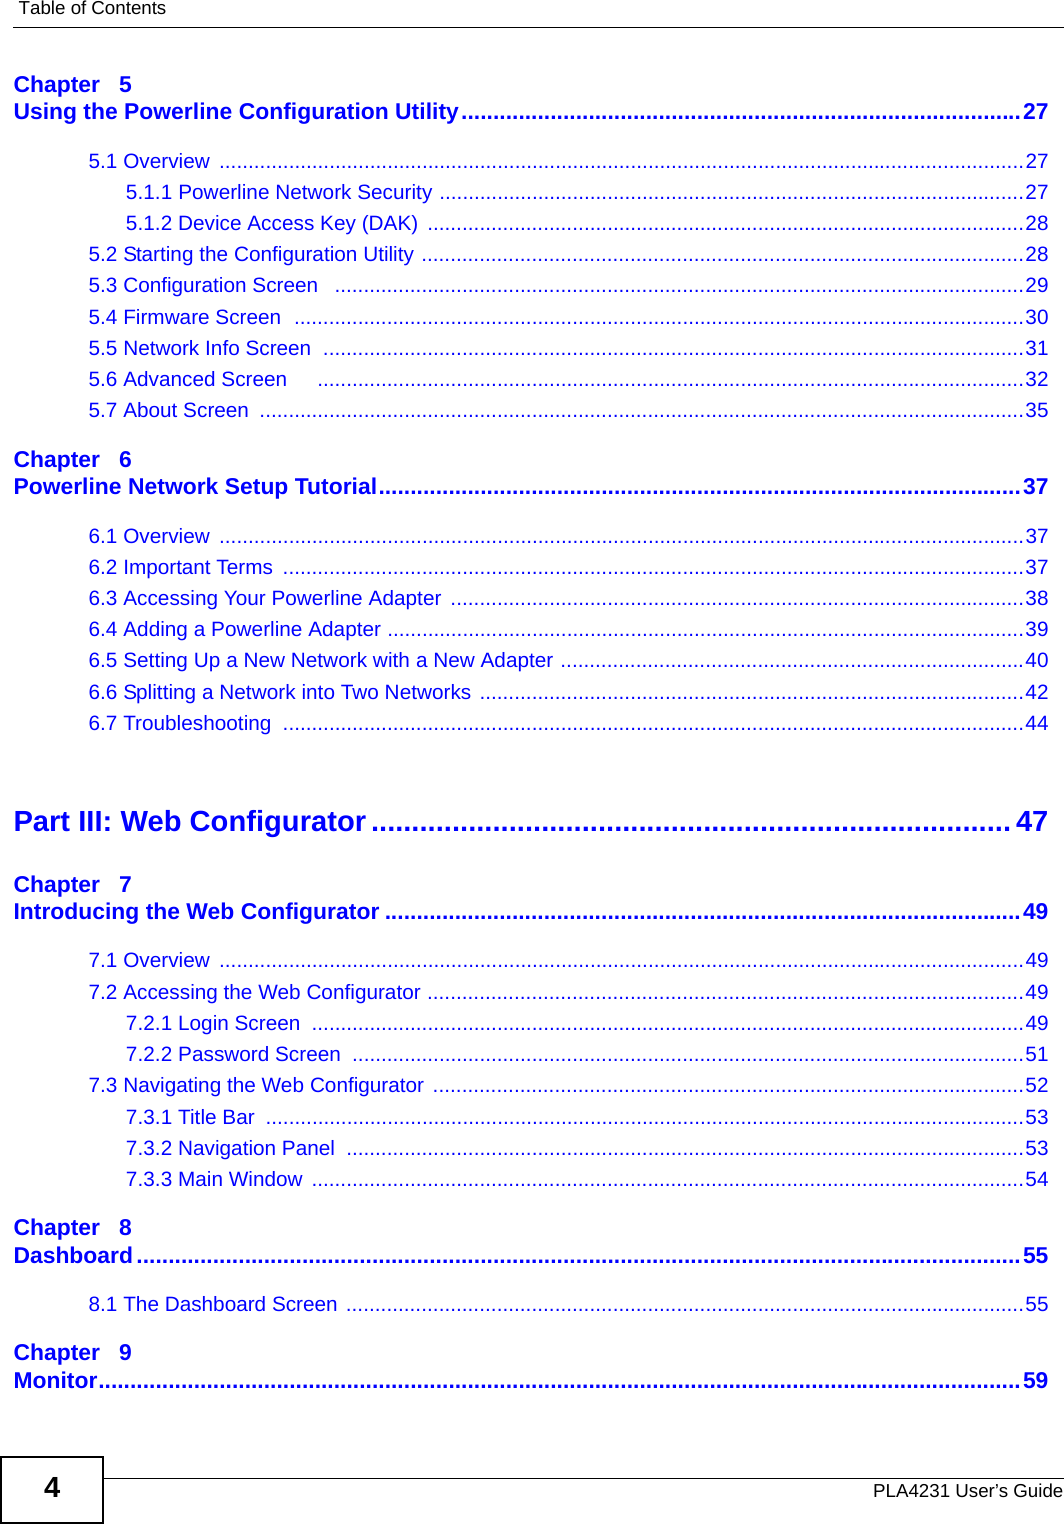 Table of ContentsPLA4231 User’s Guide4Chapter   5Using the Powerline Configuration Utility........................................................................................275.1 Overview  ...........................................................................................................................................275.1.1 Powerline Network Security .....................................................................................................275.1.2 Device Access Key (DAK)  .......................................................................................................285.2 Starting the Configuration Utility ........................................................................................................285.3 Configuration Screen   .......................................................................................................................295.4 Firmware Screen  ..............................................................................................................................305.5 Network Info Screen  .........................................................................................................................315.6 Advanced Screen     ..........................................................................................................................325.7 About Screen  ....................................................................................................................................35Chapter   6Powerline Network Setup Tutorial.....................................................................................................376.1 Overview  ...........................................................................................................................................376.2 Important Terms  ................................................................................................................................376.3 Accessing Your Powerline Adapter  ...................................................................................................386.4 Adding a Powerline Adapter ..............................................................................................................396.5 Setting Up a New Network with a New Adapter ................................................................................406.6 Splitting a Network into Two Networks ..............................................................................................426.7 Troubleshooting  ................................................................................................................................44Part III: Web Configurator............................................................................... 47Chapter   7Introducing the Web Configurator ....................................................................................................497.1 Overview  ...........................................................................................................................................497.2 Accessing the Web Configurator .......................................................................................................497.2.1 Login Screen  ...........................................................................................................................497.2.2 Password Screen  ....................................................................................................................517.3 Navigating the Web Configurator ......................................................................................................527.3.1 Title Bar  ...................................................................................................................................537.3.2 Navigation Panel  .....................................................................................................................537.3.3 Main Window  ...........................................................................................................................54Chapter   8Dashboard...........................................................................................................................................558.1 The Dashboard Screen .....................................................................................................................55Chapter   9Monitor.................................................................................................................................................59